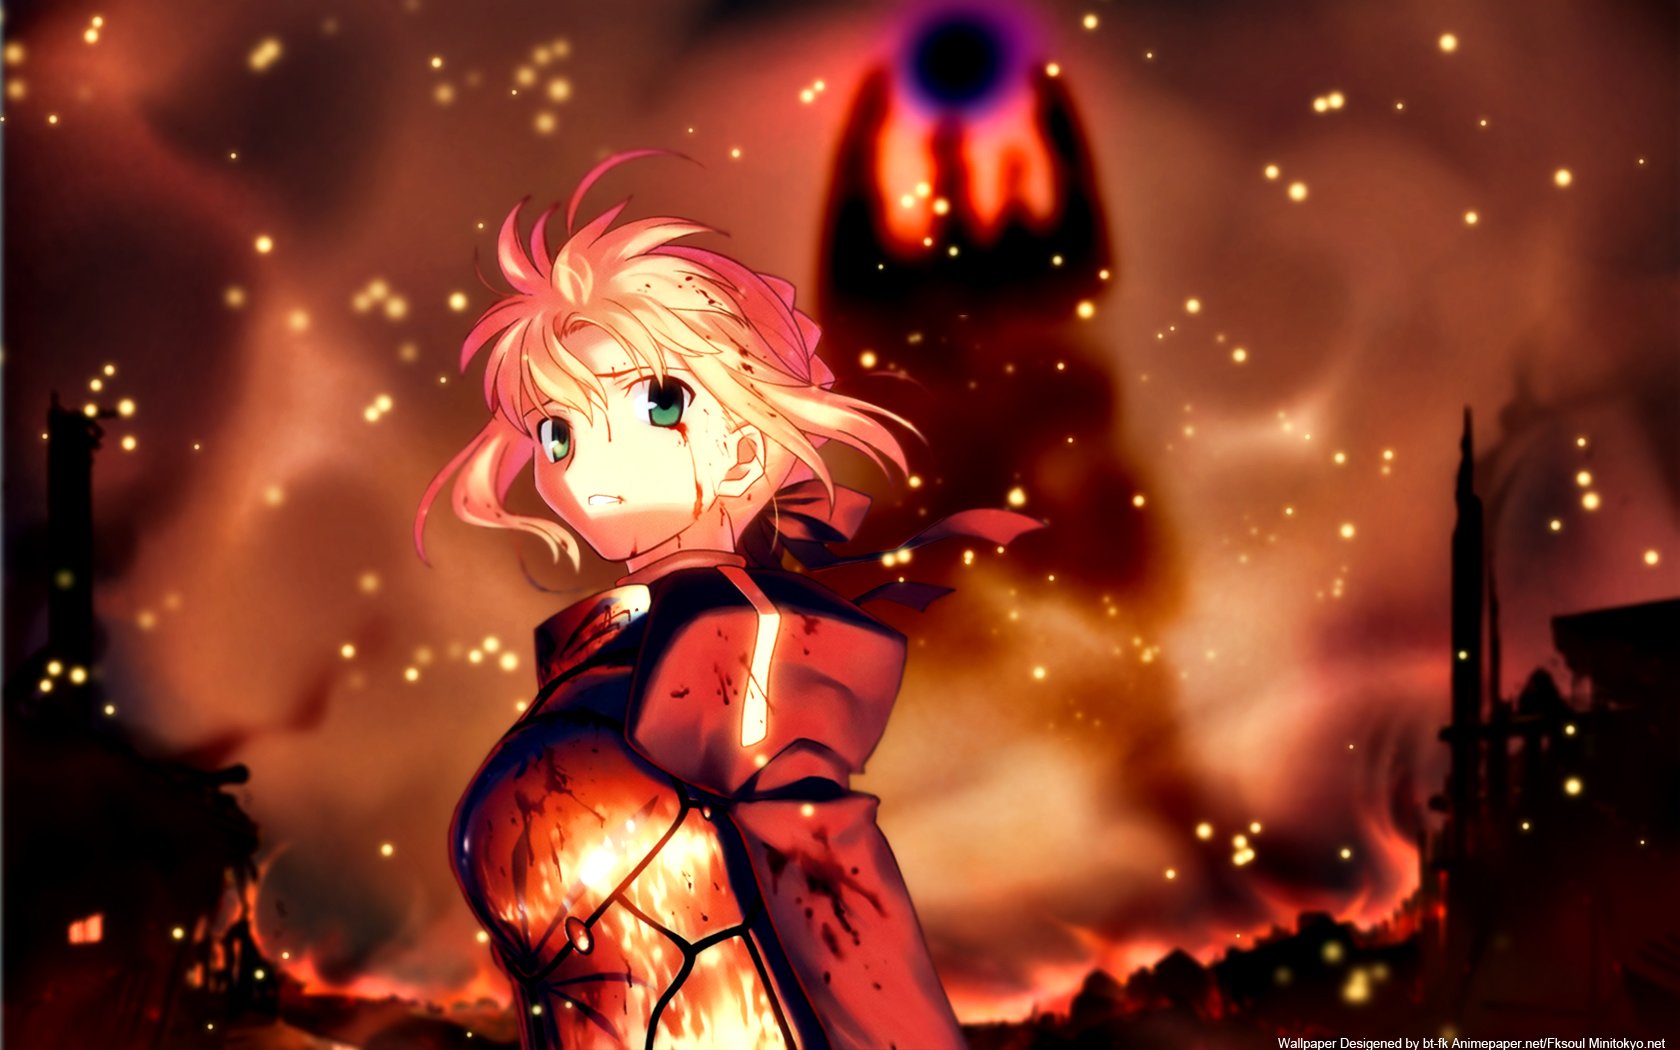 Saber Fate Stay Night Wallpaper